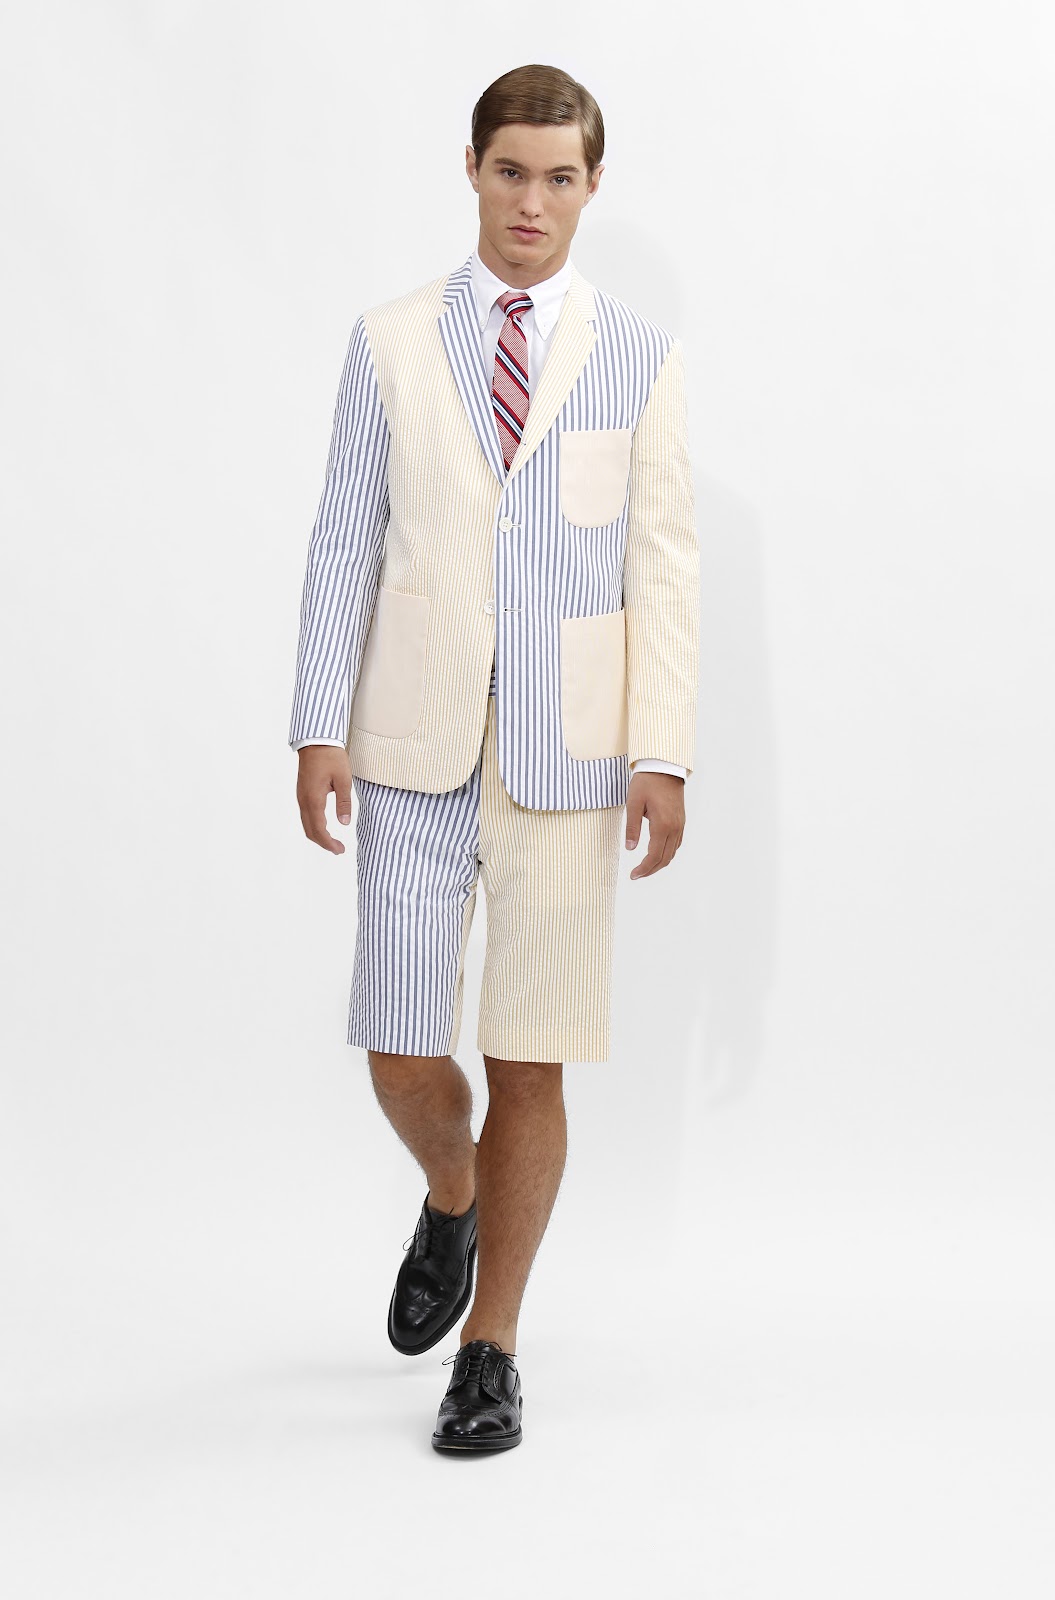 BROOKS BROTHERS SPRING 2013 LOOK BOOK | COOL CHIC STYLE to dress italian